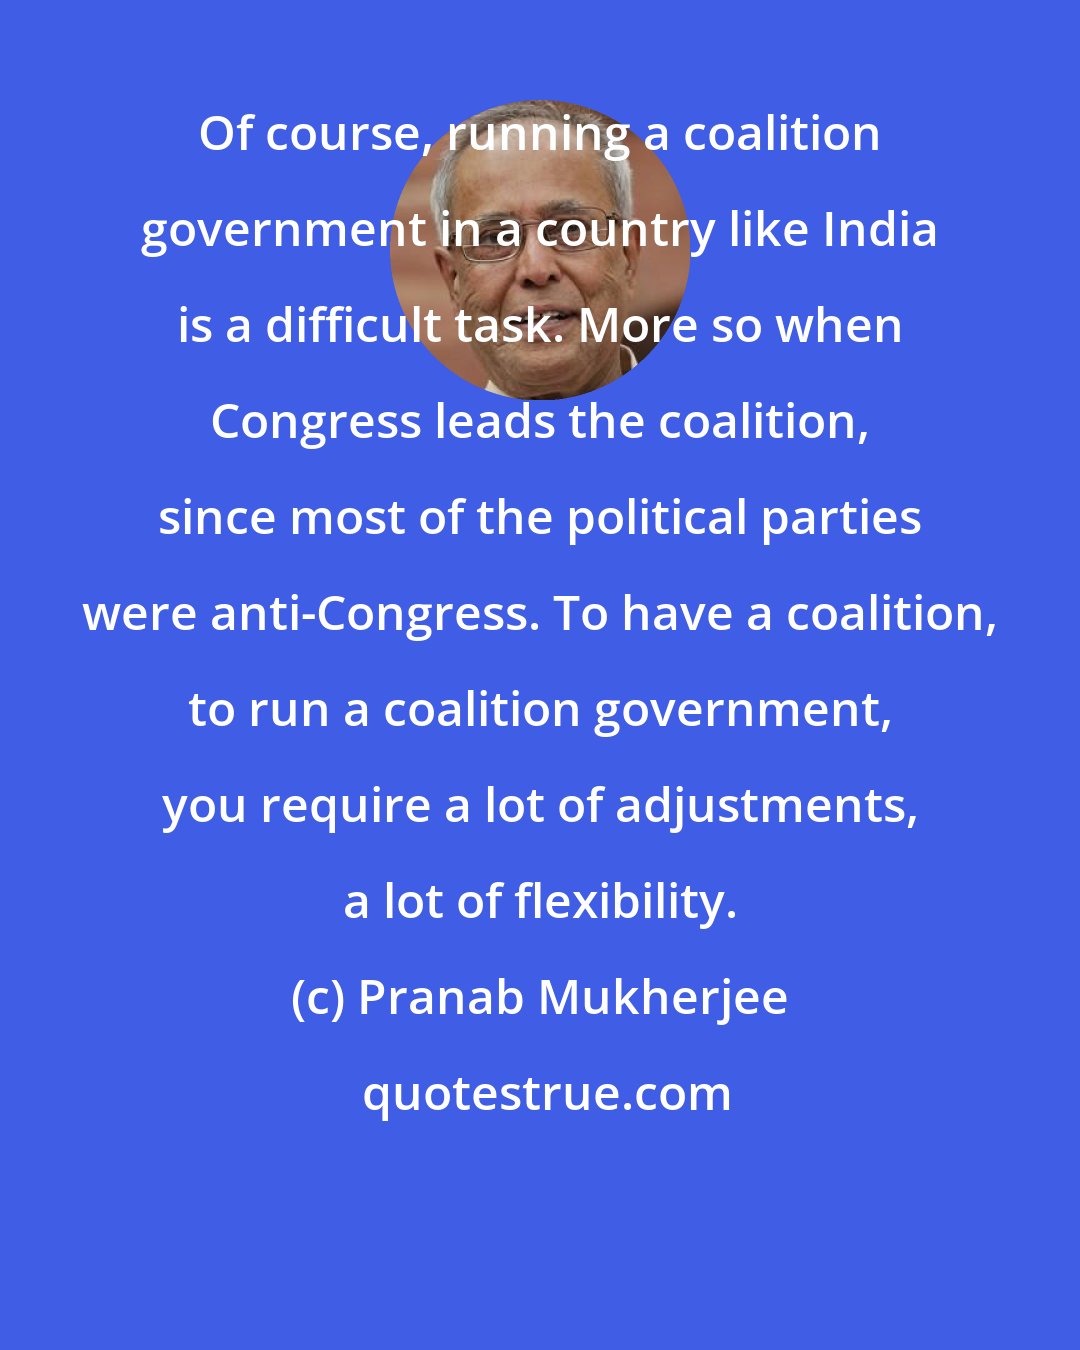 Pranab Mukherjee: Of course, running a coalition government in a country like India is a difficult task. More so when Congress leads the coalition, since most of the political parties were anti-Congress. To have a coalition, to run a coalition government, you require a lot of adjustments, a lot of flexibility.